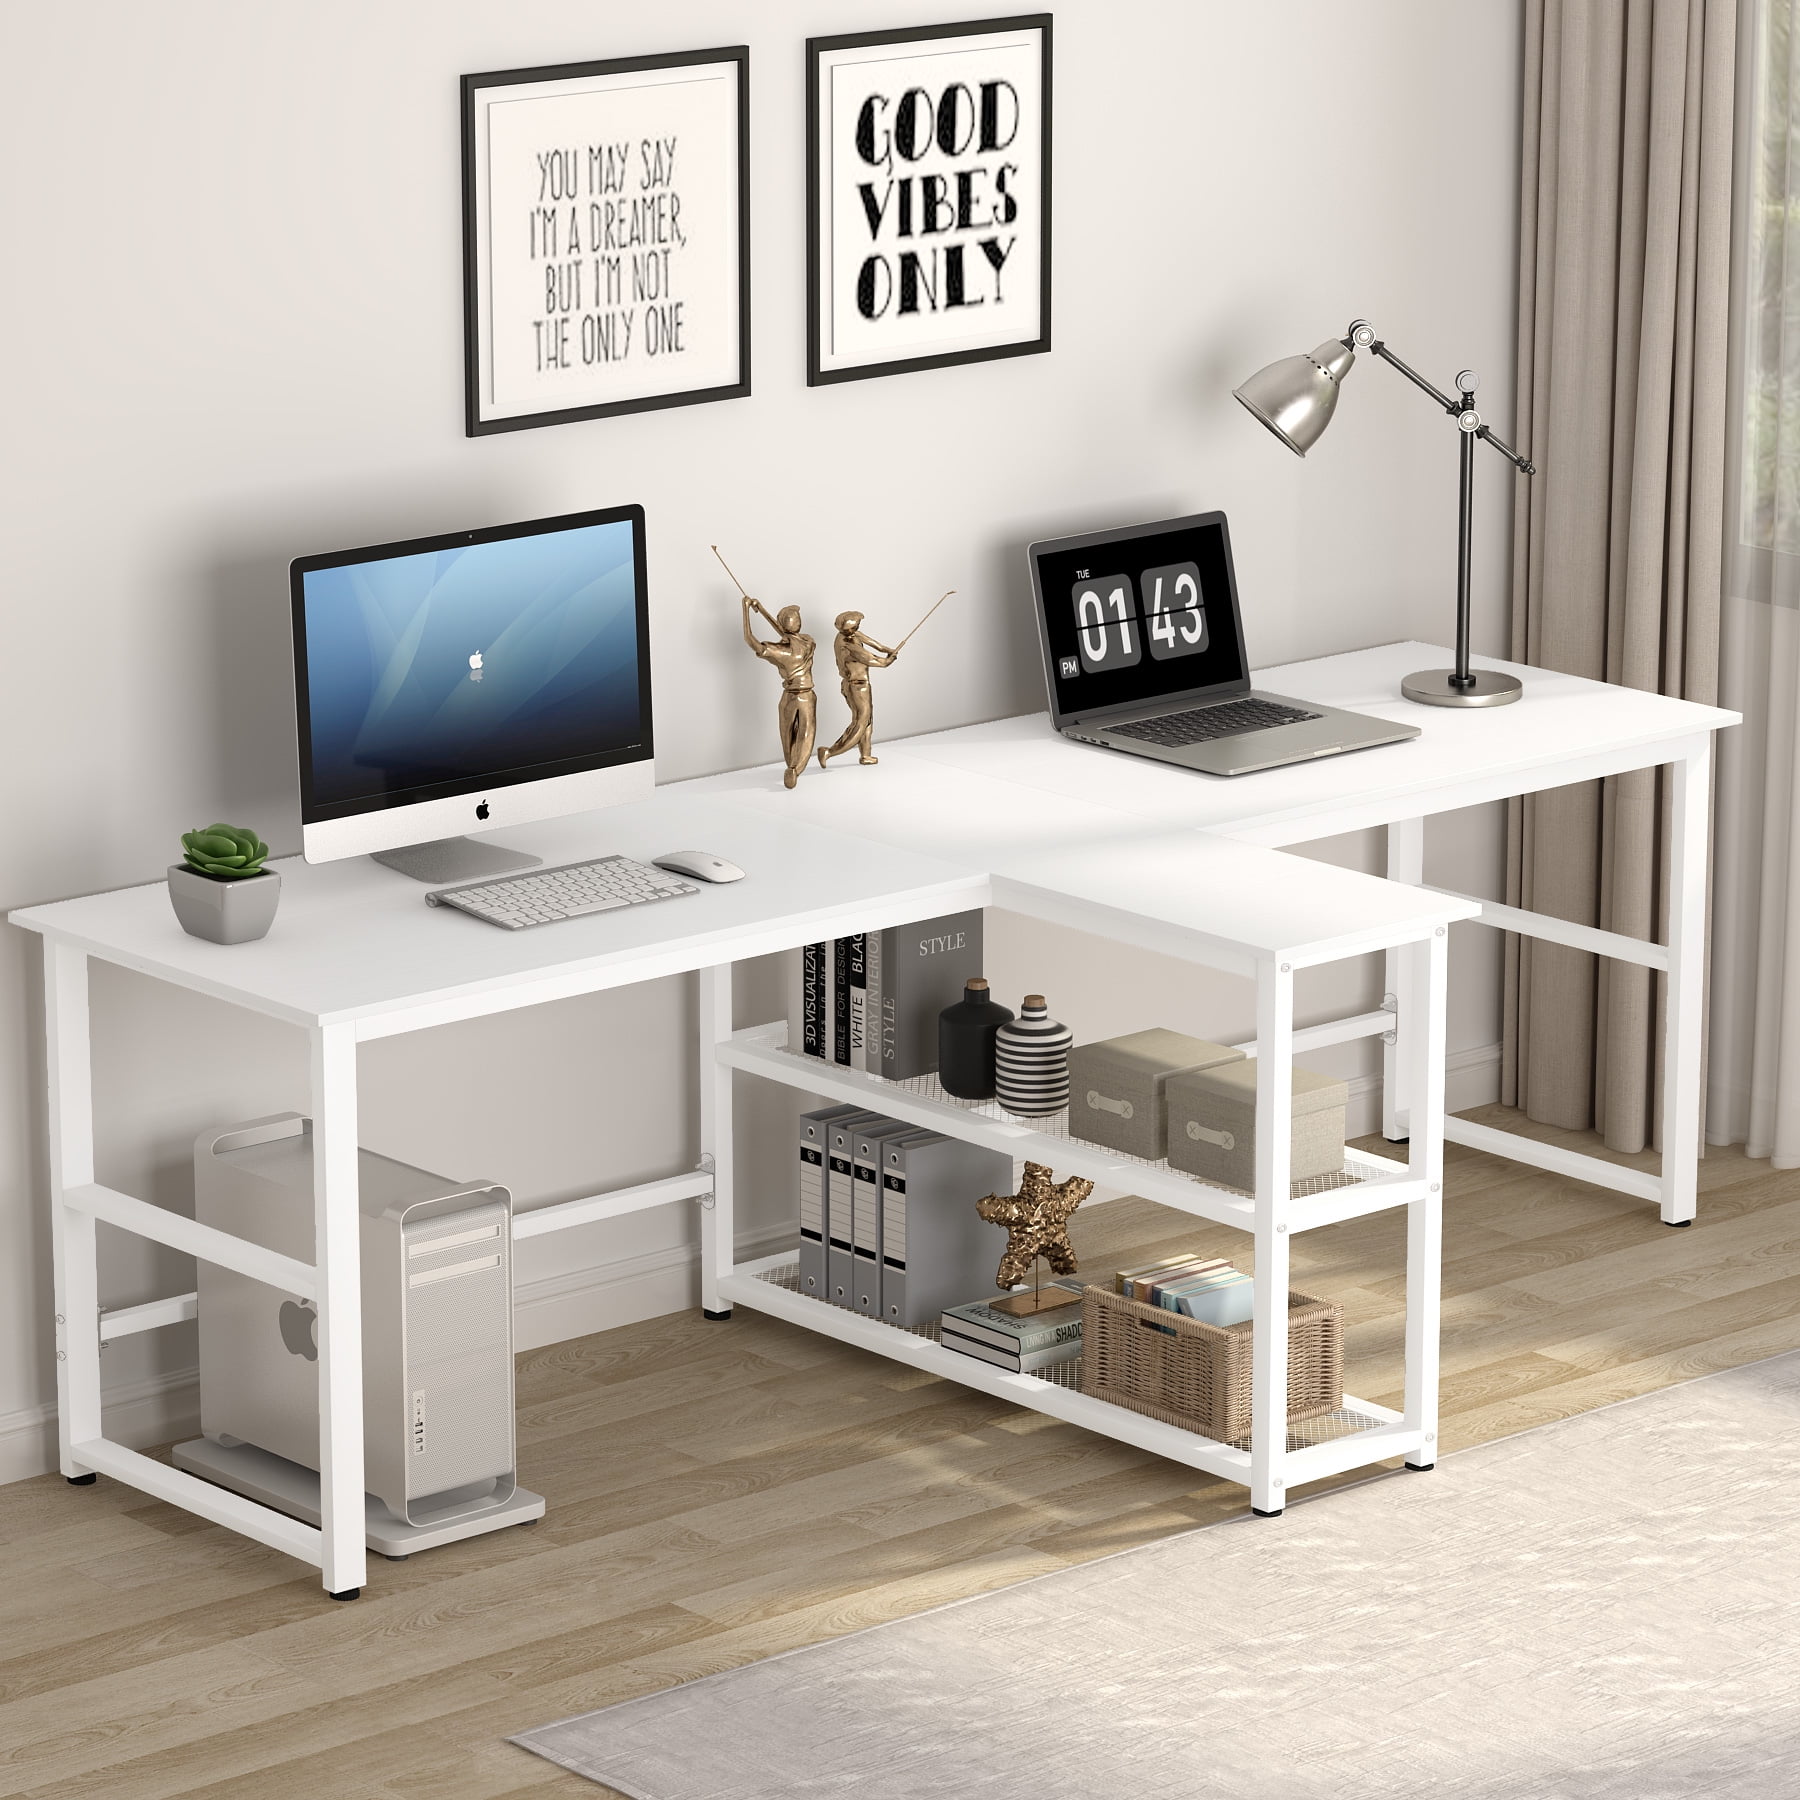 Tribesigns 94.5 inch Computer Desk, Extra Long Two Person Desk with